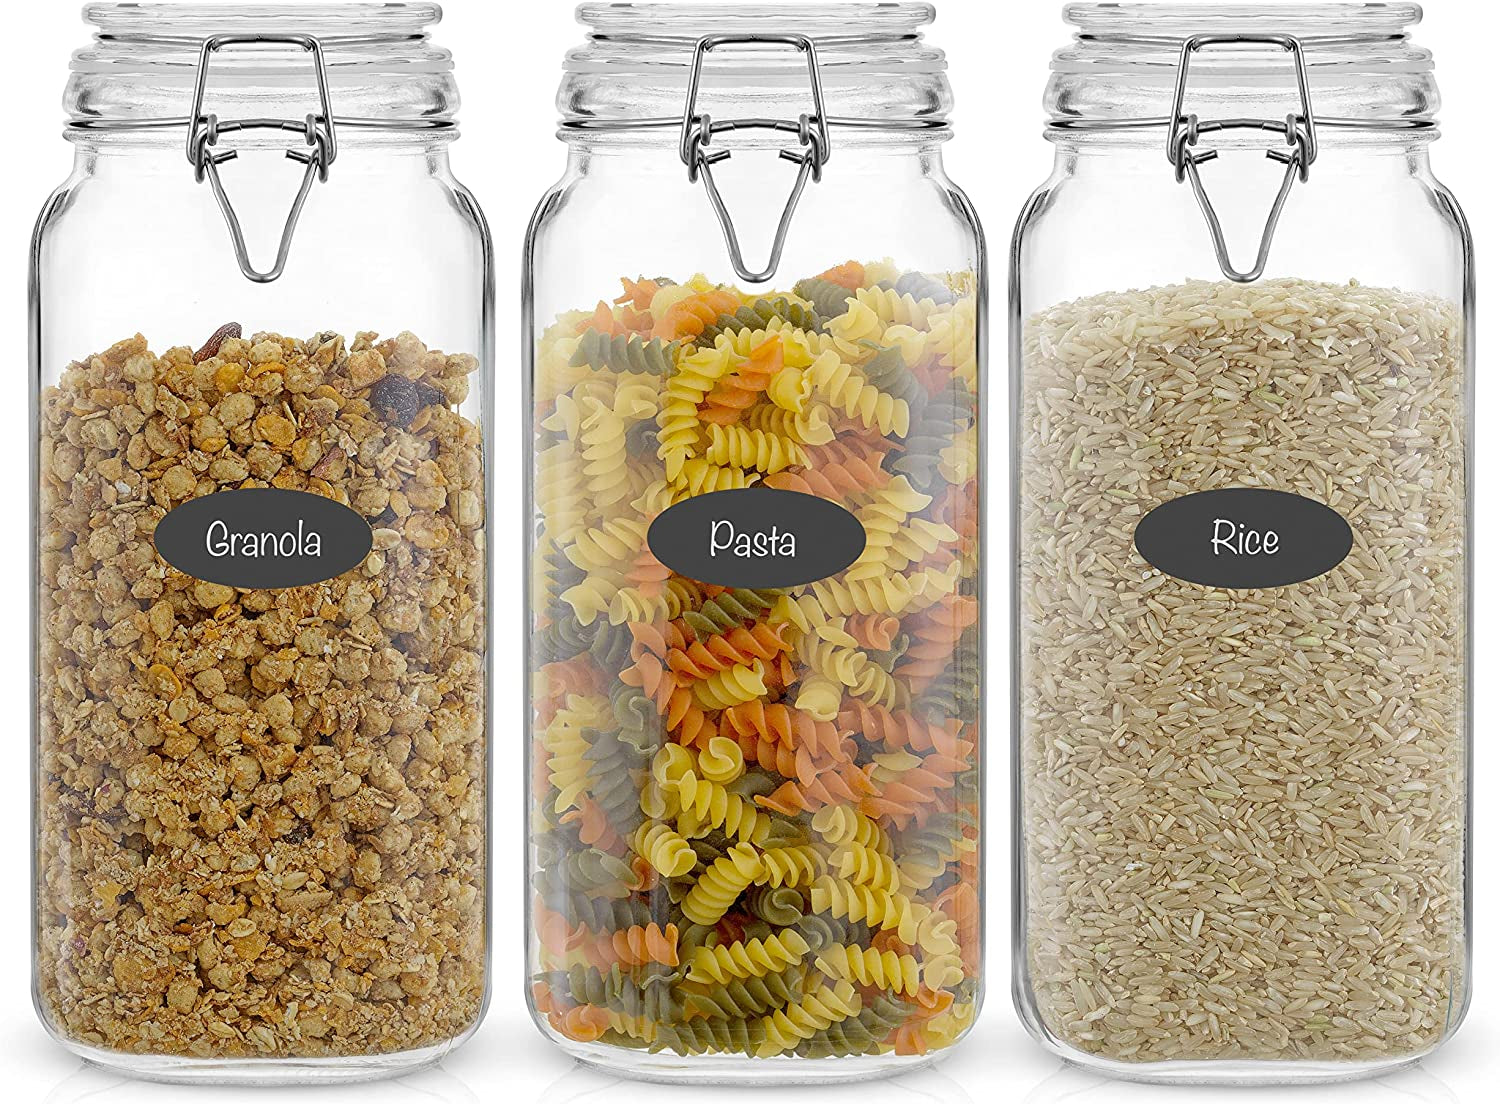 Glass Spice Jars With Label 25pcs Spice Jars With Shaker Lids4 Oz Gold Spice  Sea